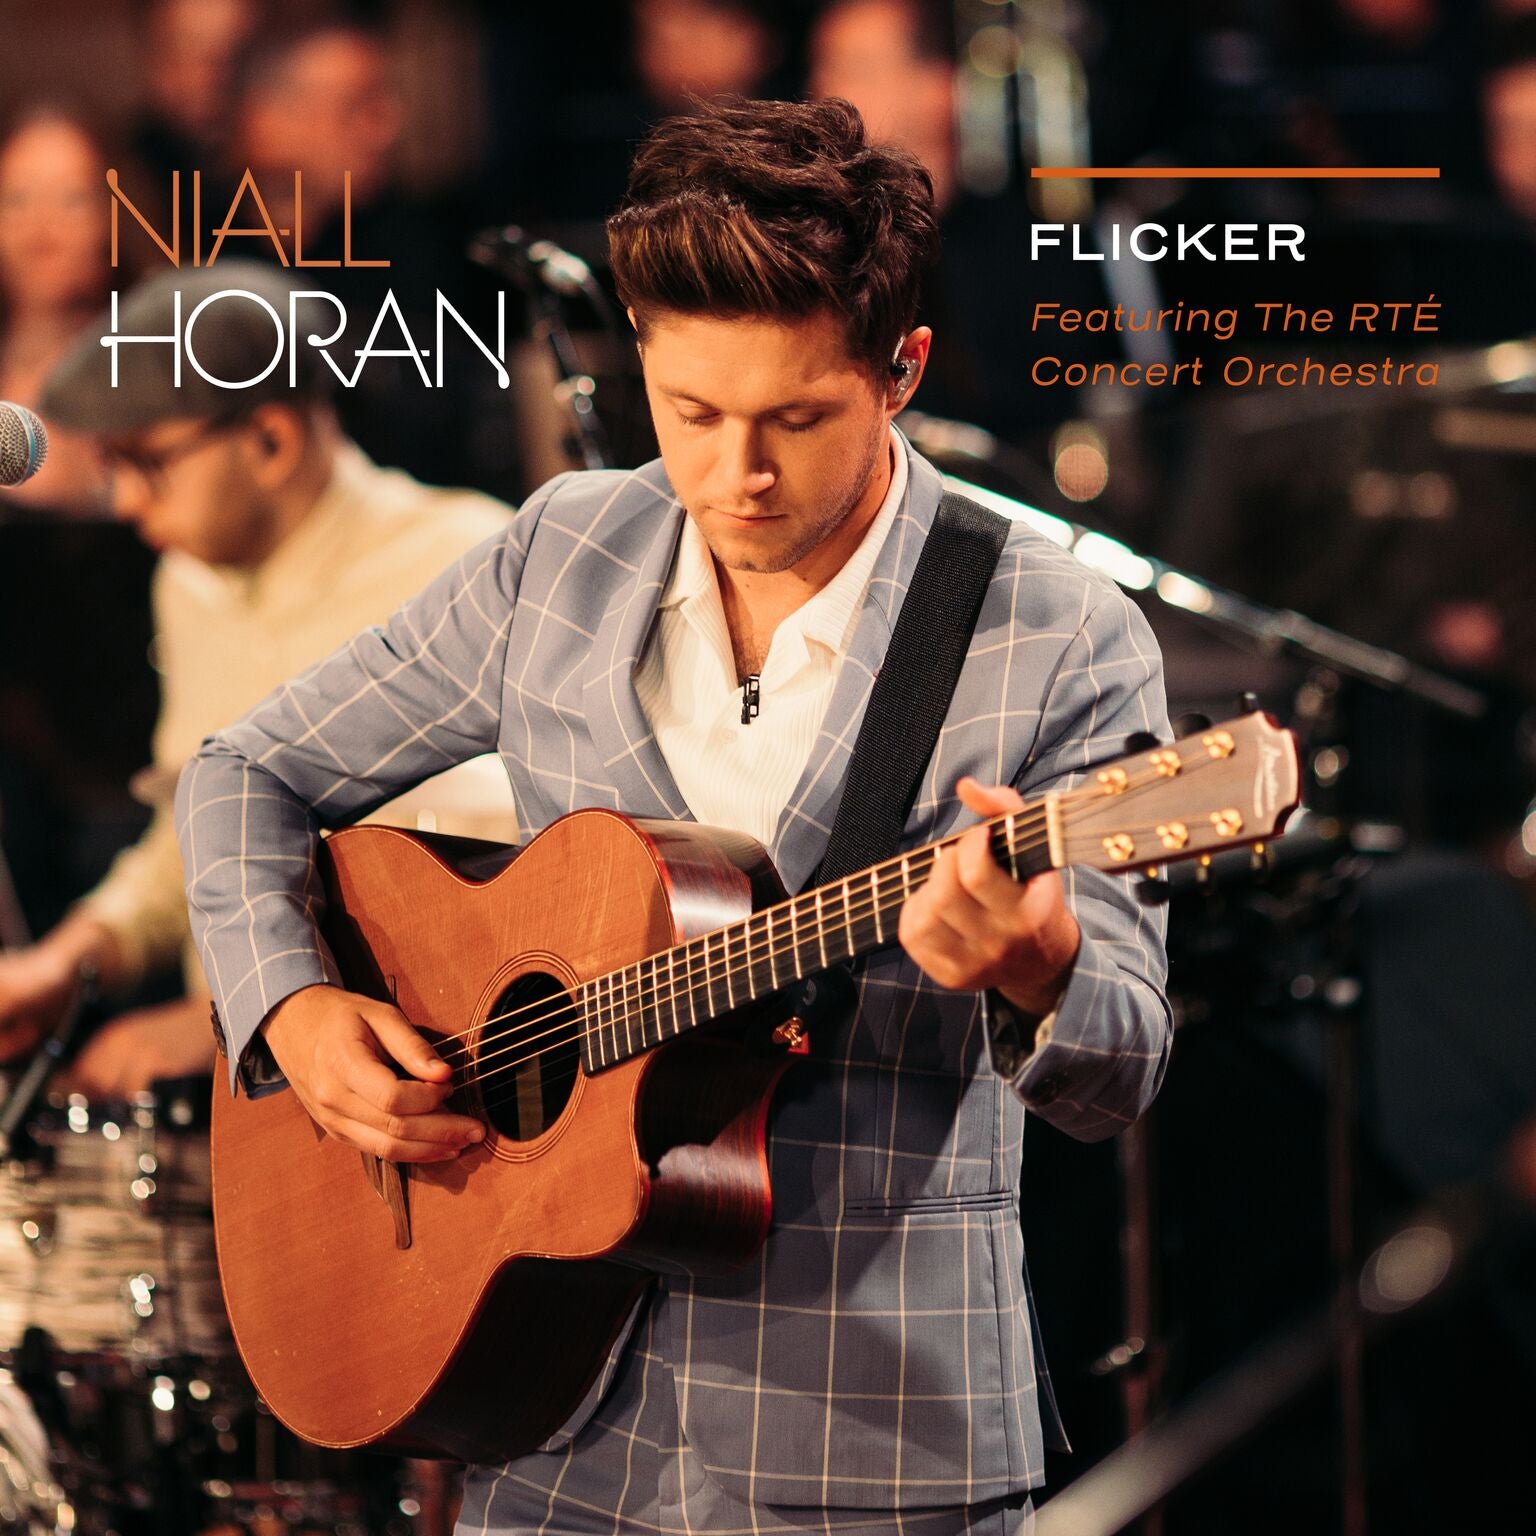 Niall Horan - Flicker Featuring The RTÉ Concert Orchestra CD